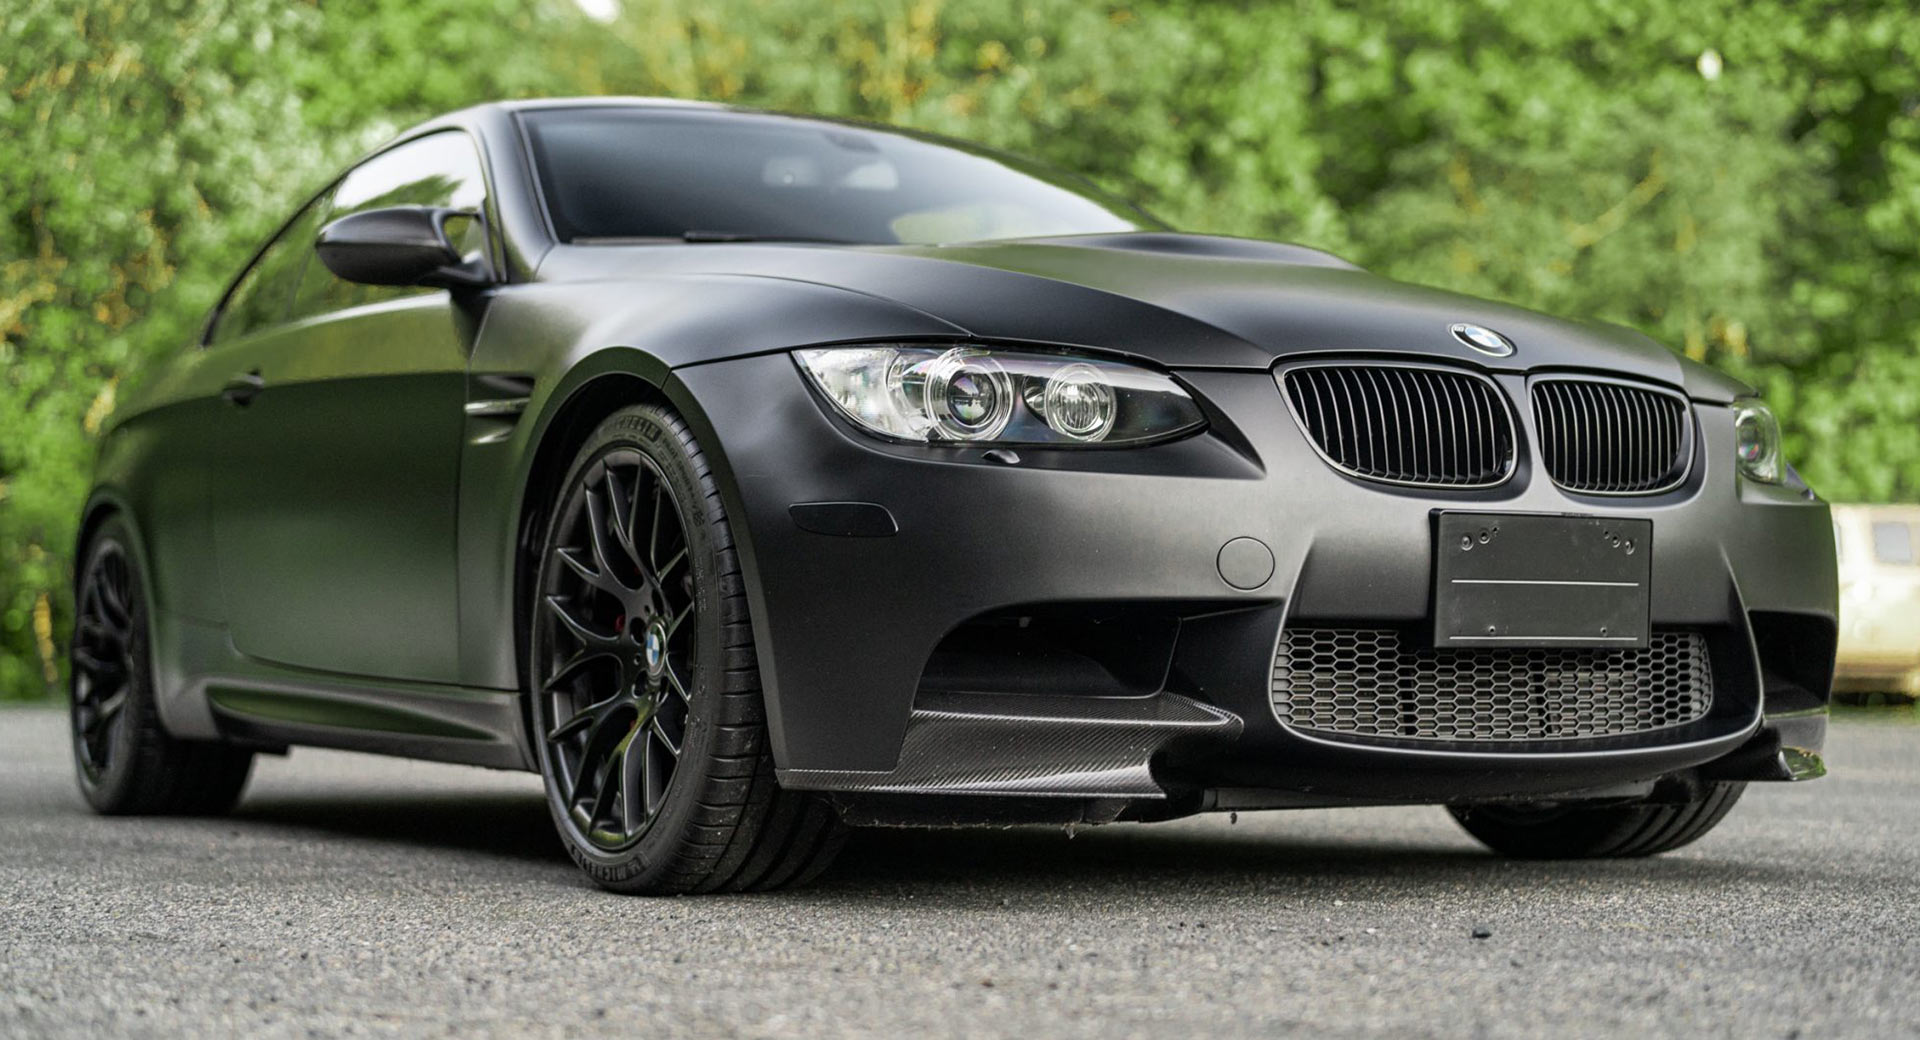 10 Reasons Why People Love The E92 BMW M3